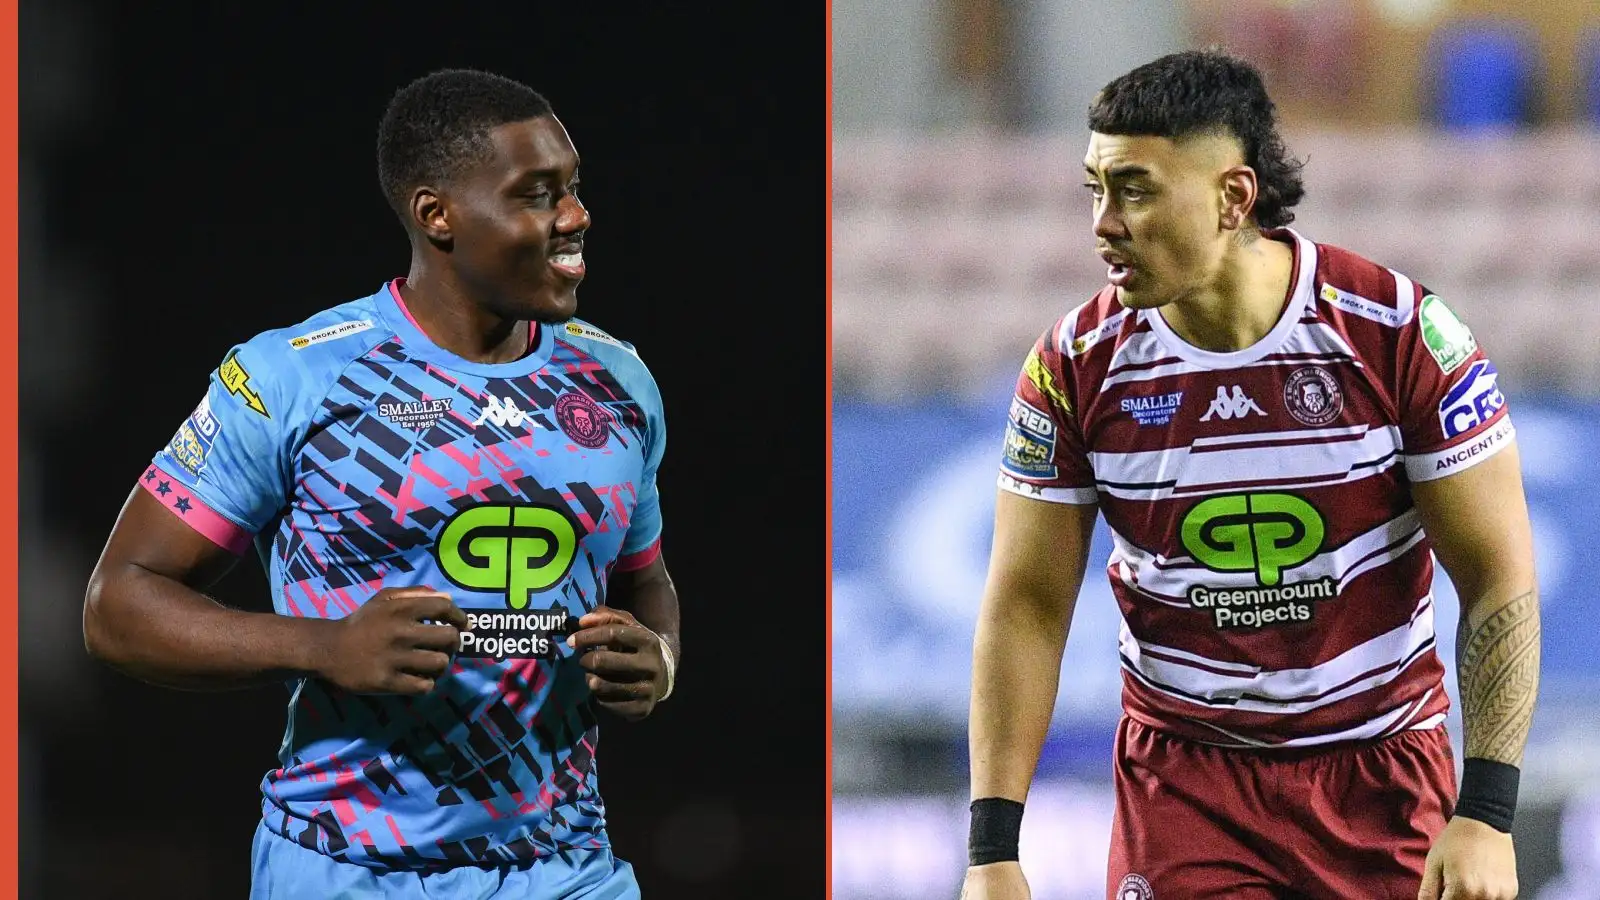 Wigan Warriors boss confirms duo loans as he provides Mike Cooper, Sam Walters latest